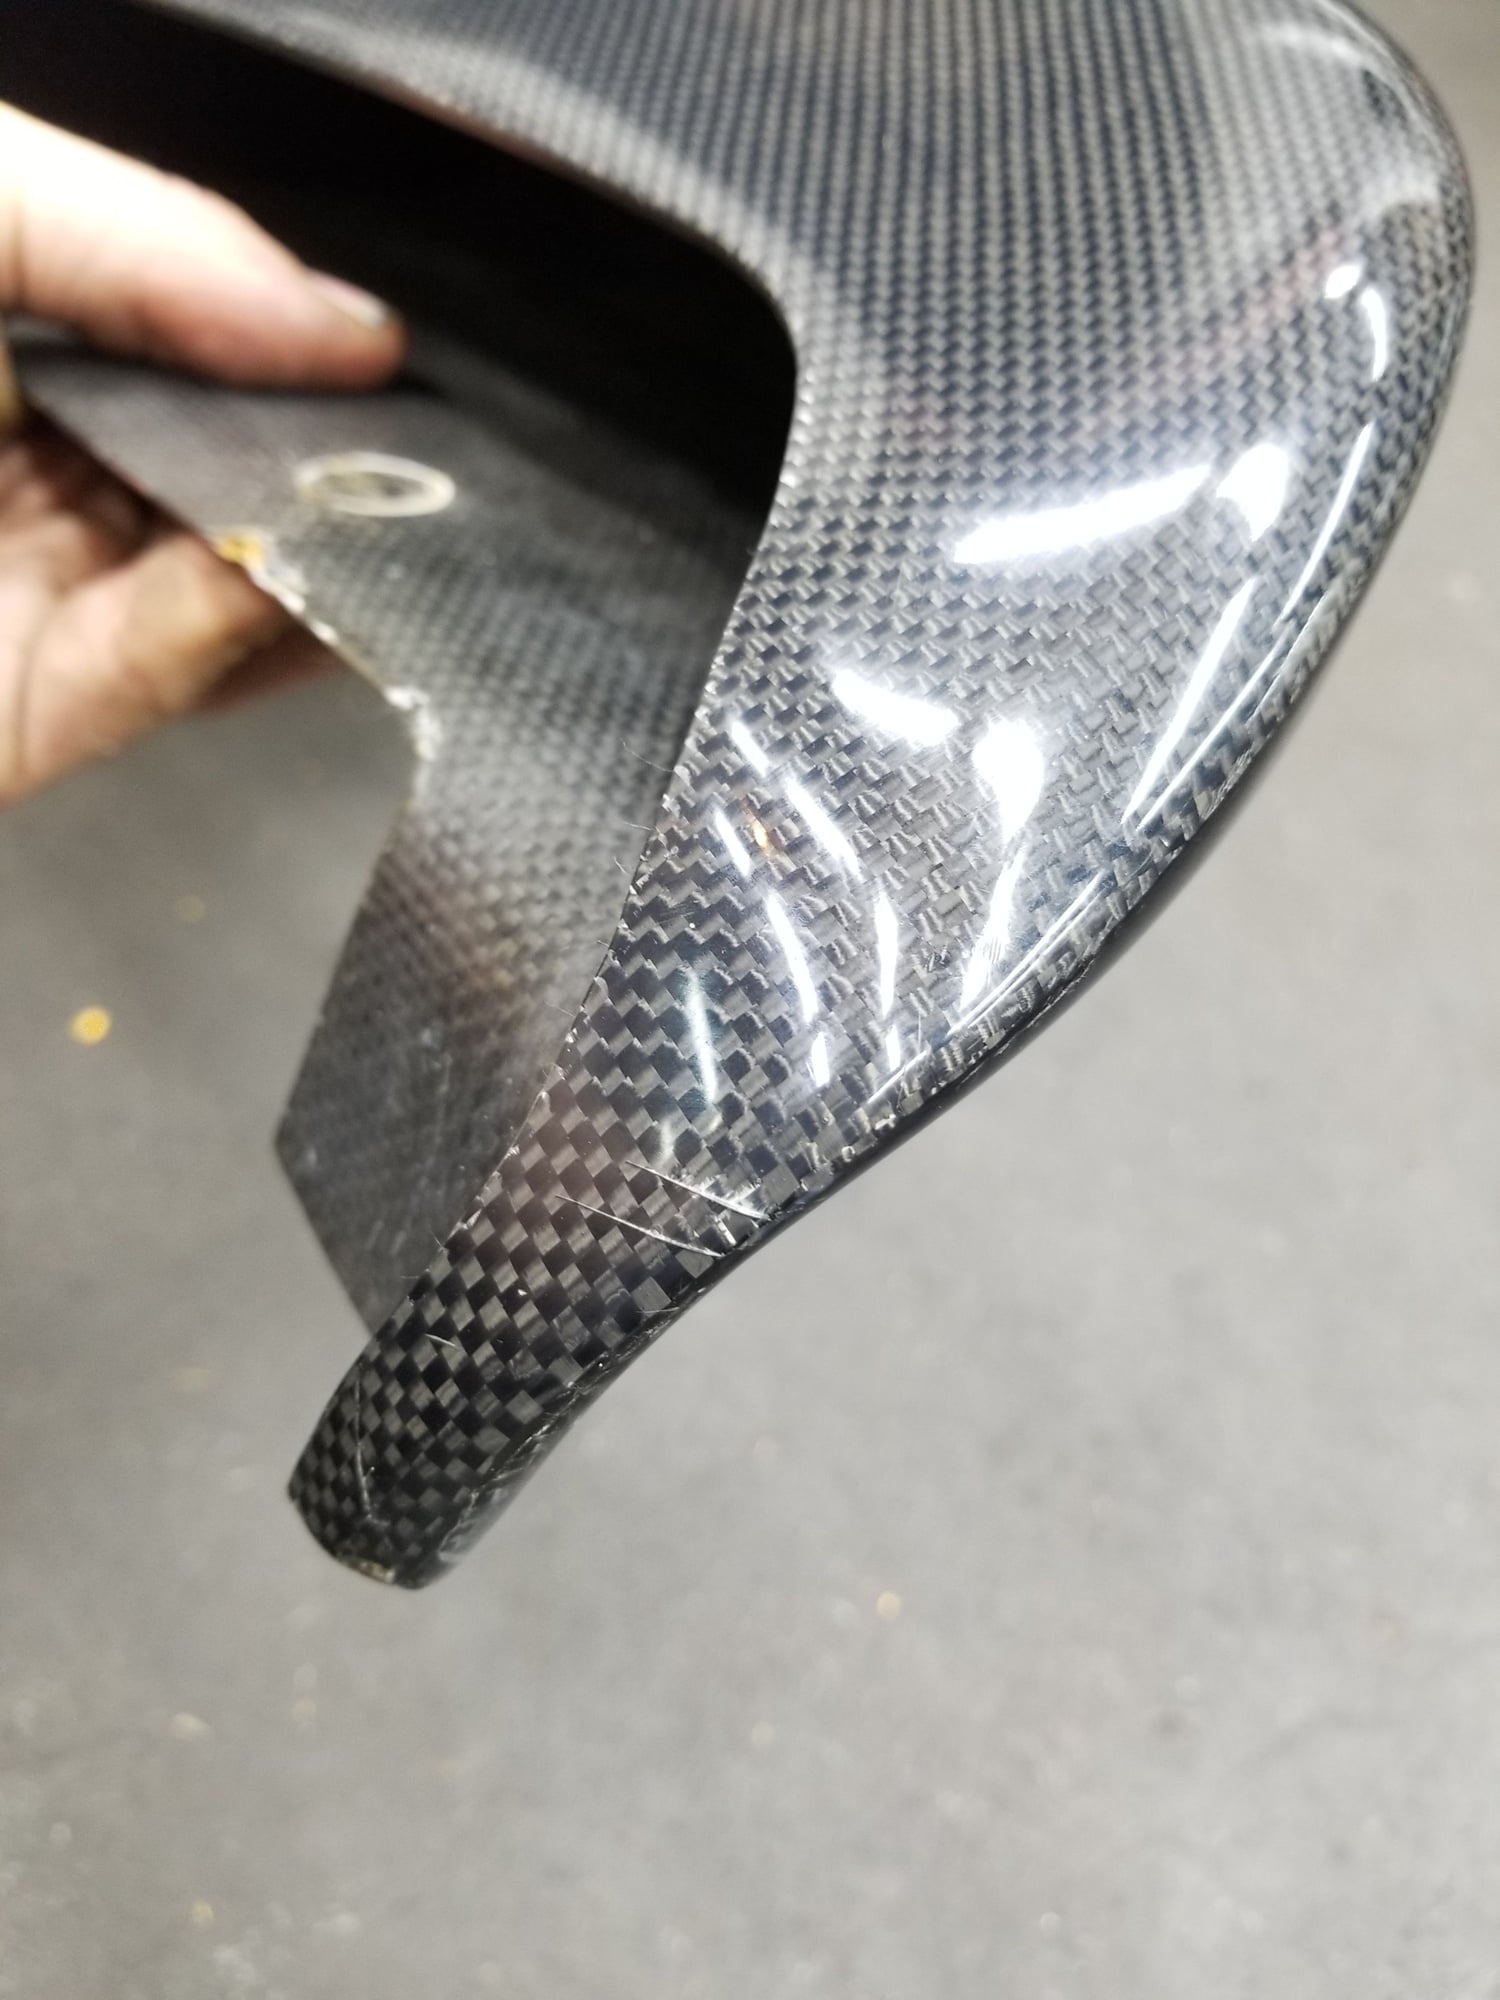 Engine - Intake/Fuel - FD Autoexe carbon fiber cold air intake for twin turbos - Used - Morristown, TN 37814, United States